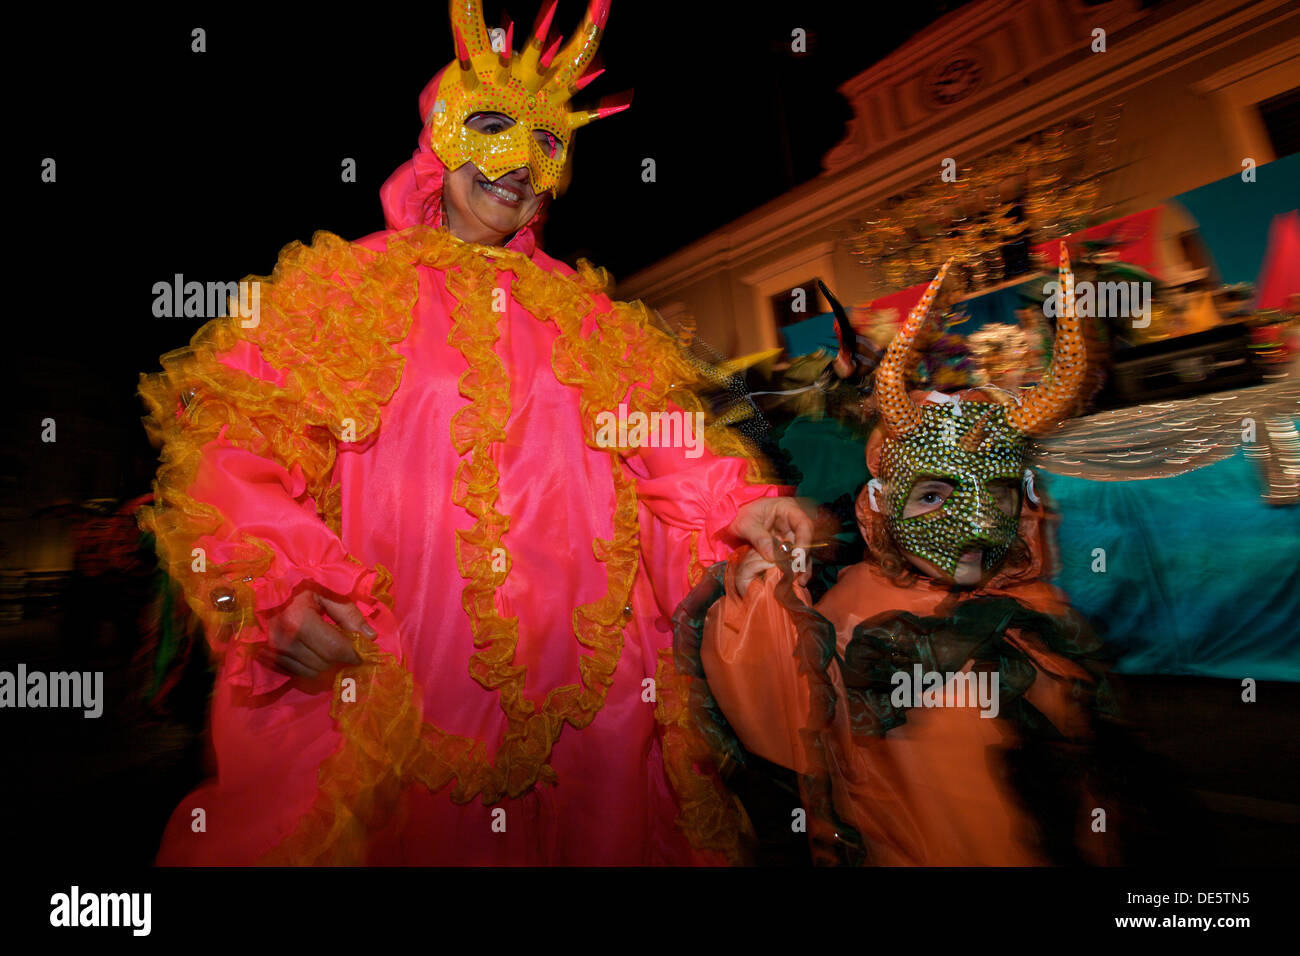 A costumed reveler called a vejigante dances in the streets during the Carnaval de Ponce February 21, 2009 in Ponce, Puerto Rico. Vejigantes are a folkloric character representing the devil. Stock Photo